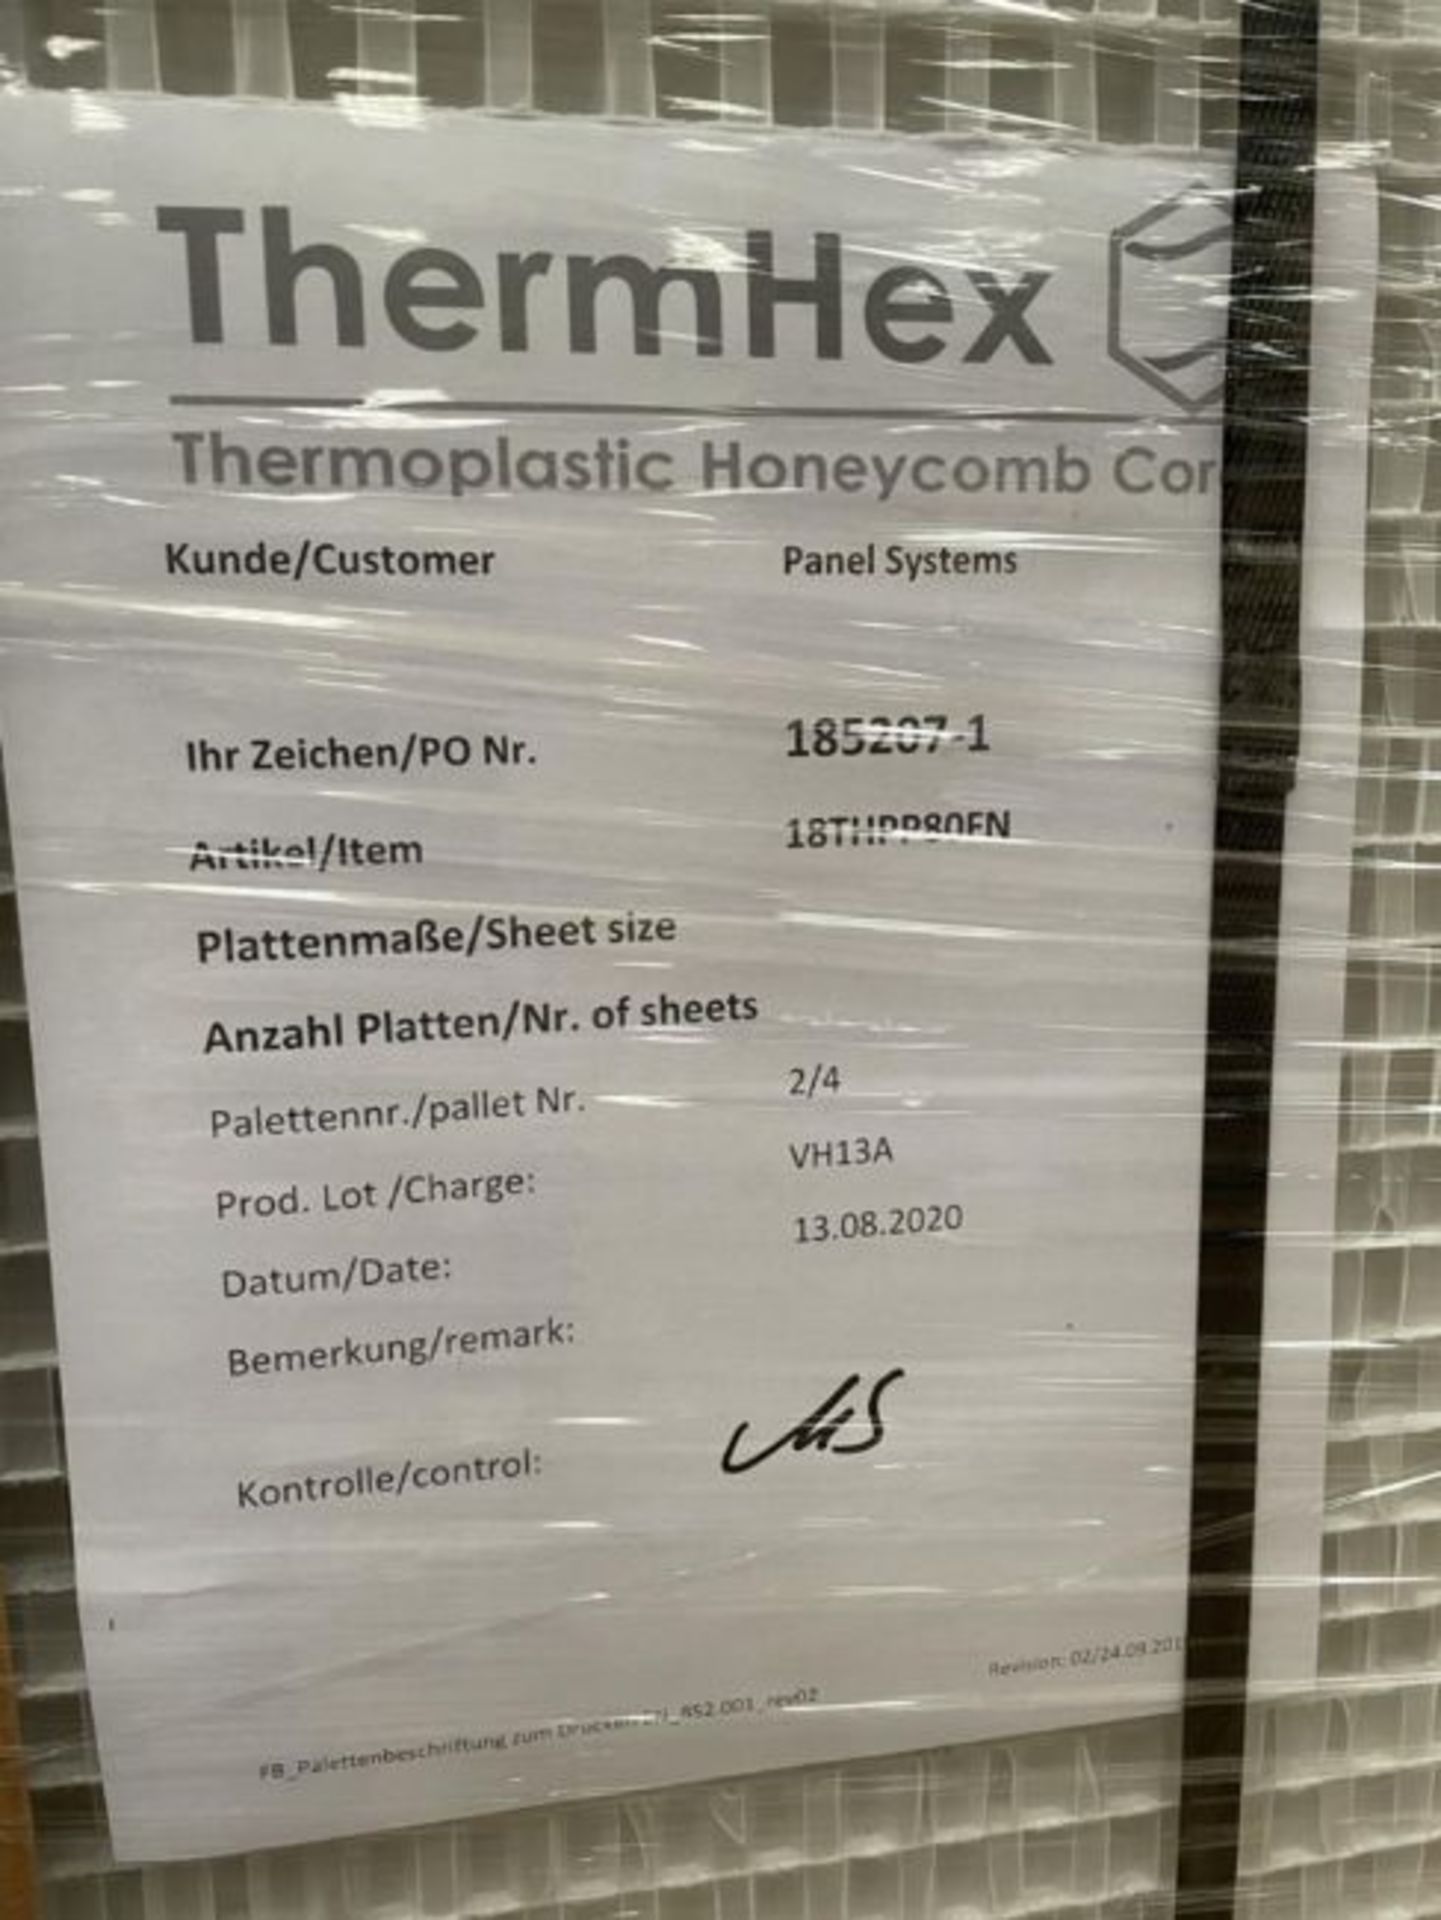 24 x ThermHex Thermoplastic Honeycomb Core Panels - Size 3175 x 1210 x 20mm - New Stock - - Image 2 of 7